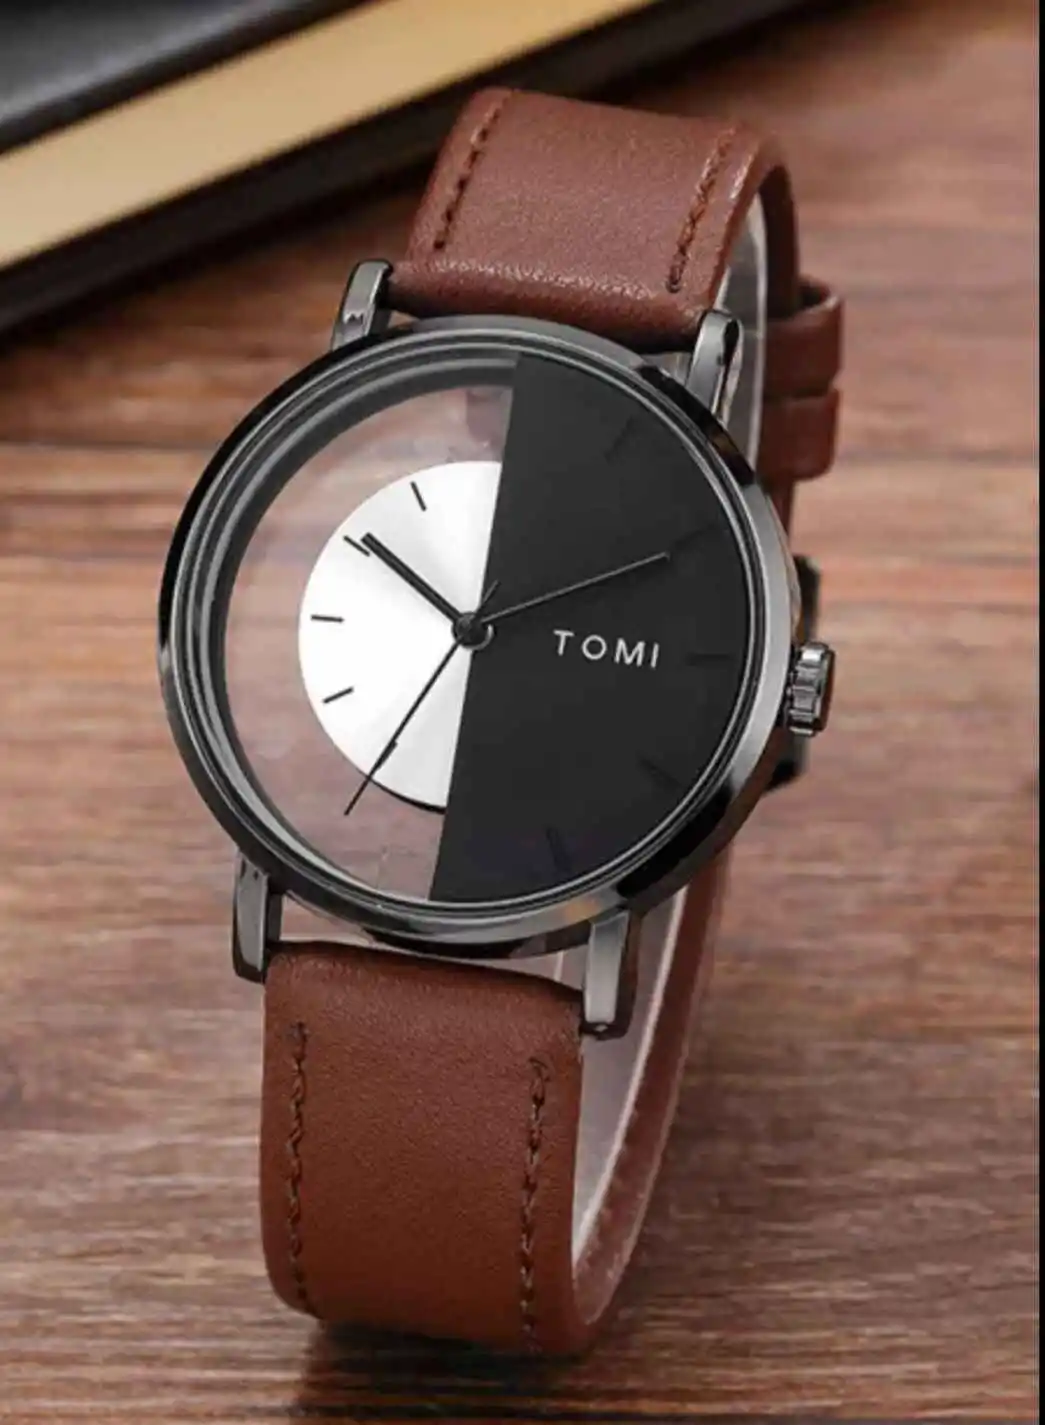 TOMI A unisex Brown Analog Leather Watch From TOMI, Watch Face Measures 40 MM And Is 9 MM Thick